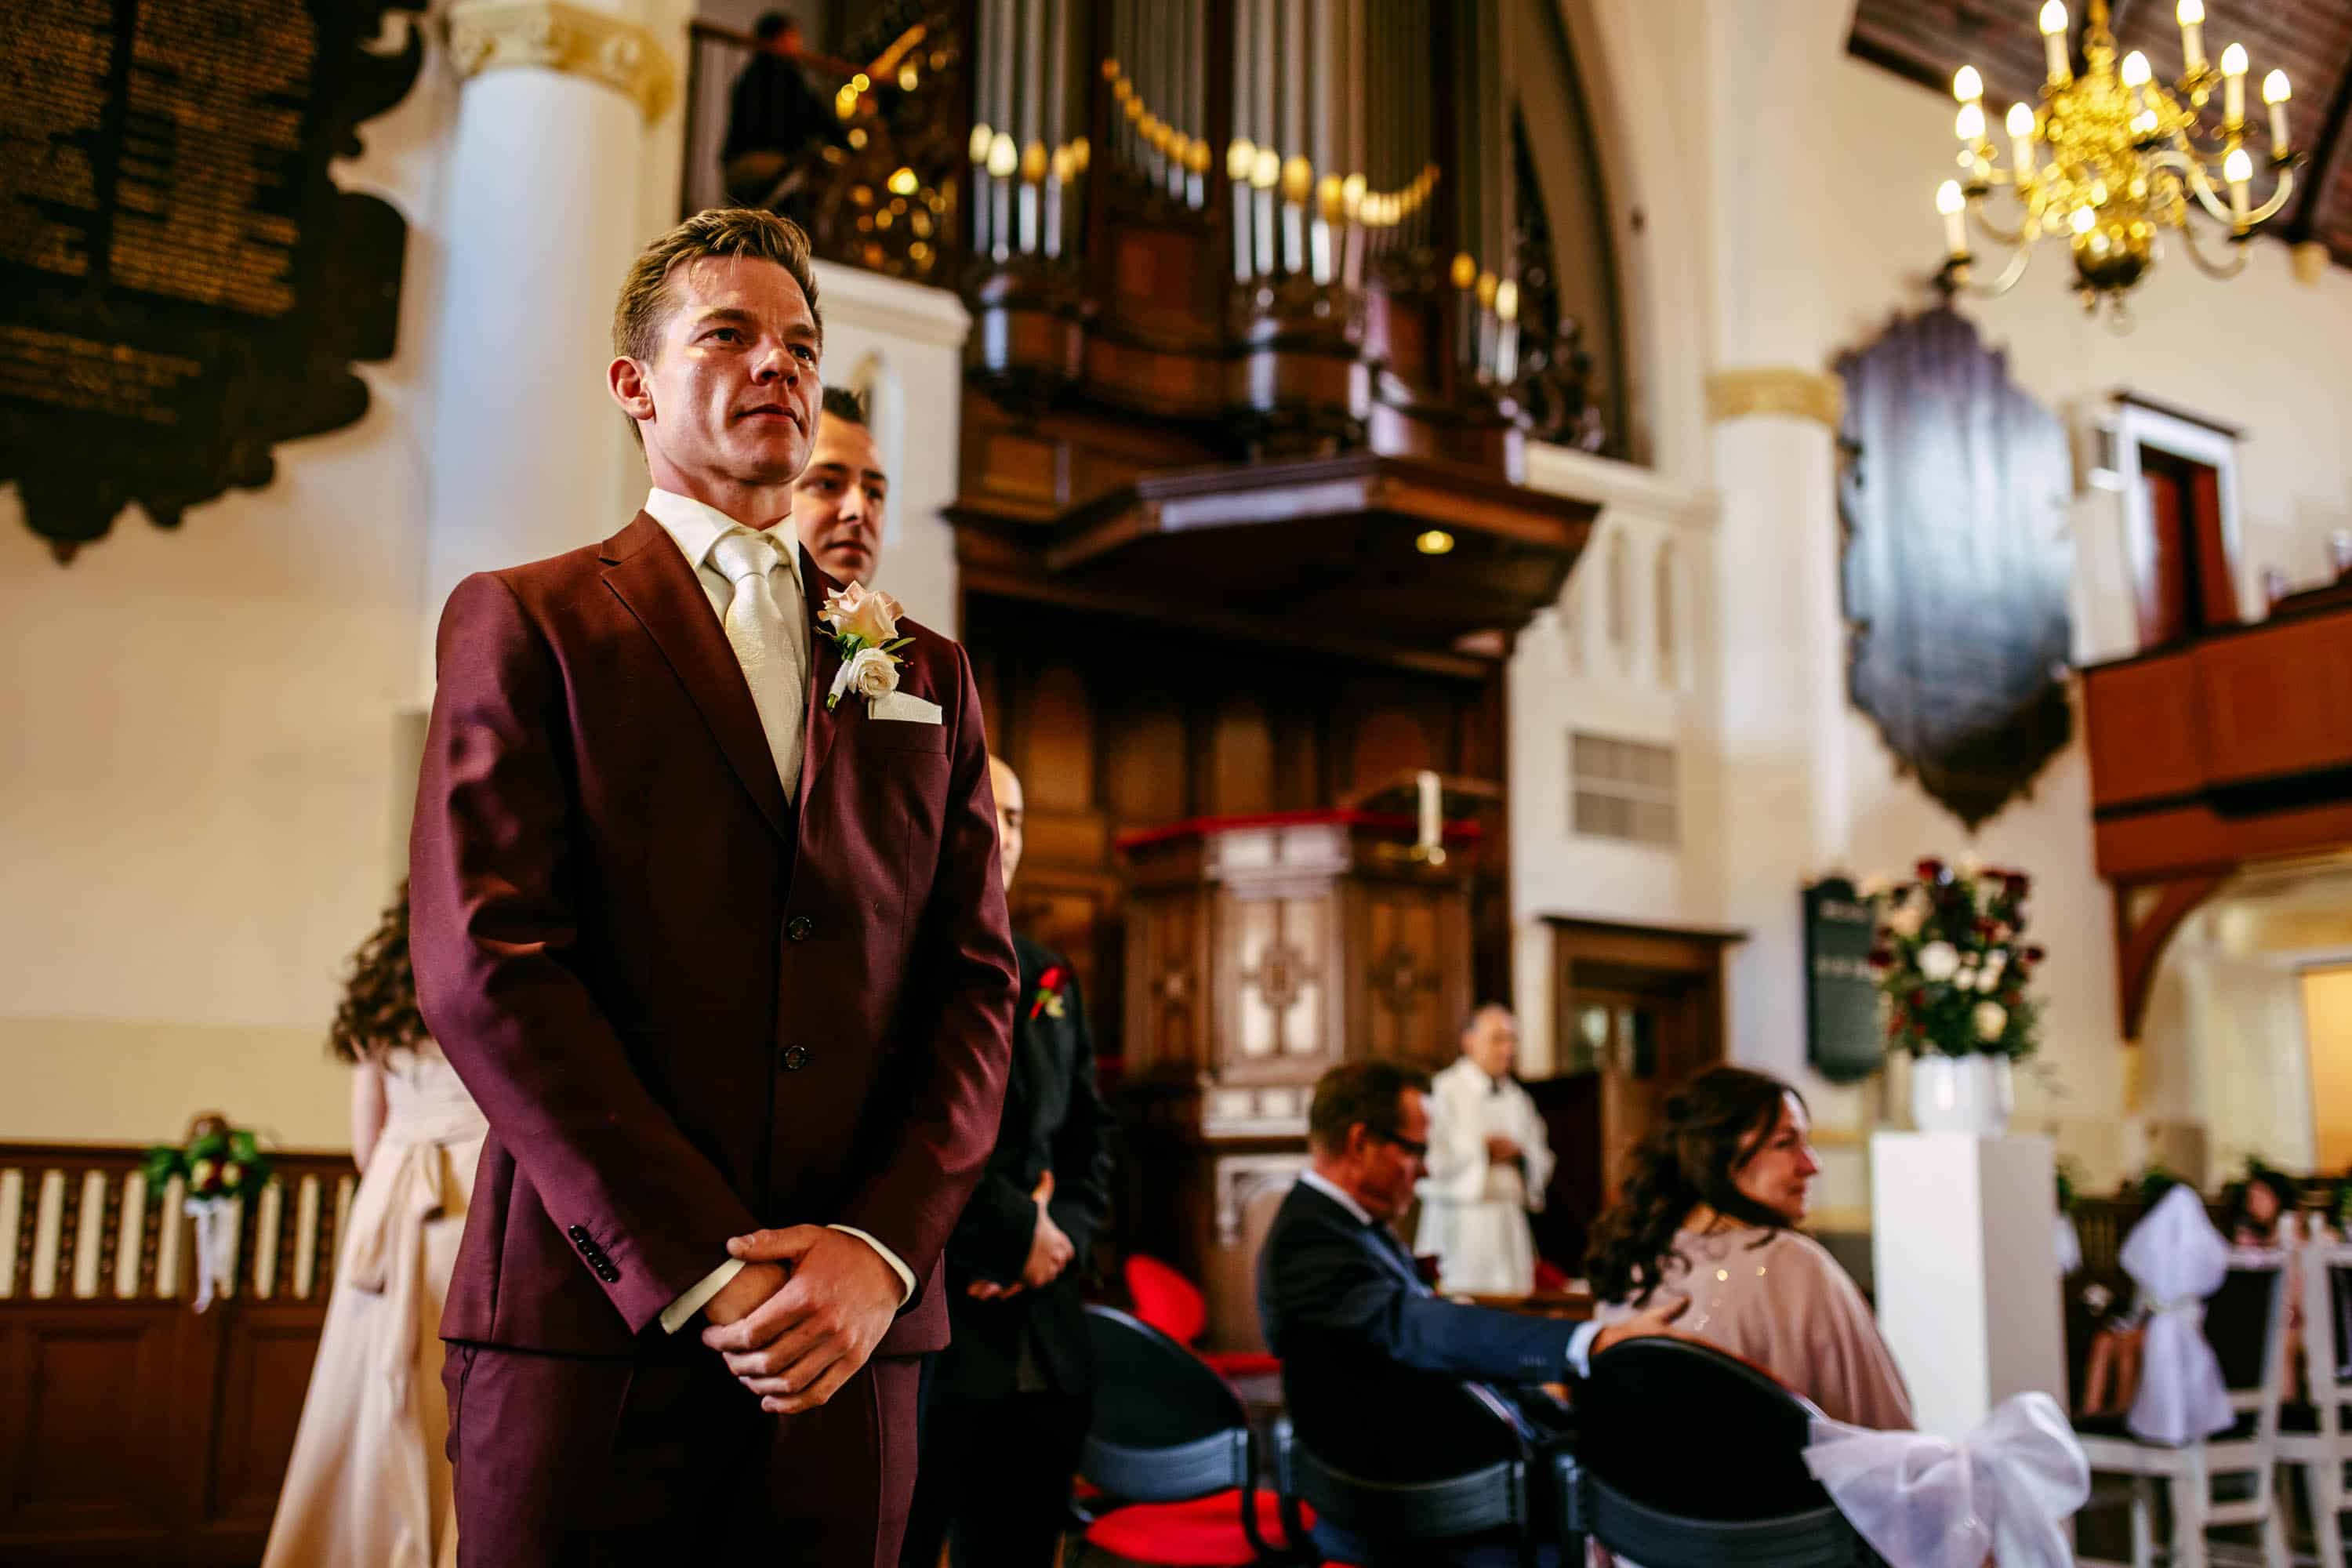 A man in a suit walks down the aisle of a church.